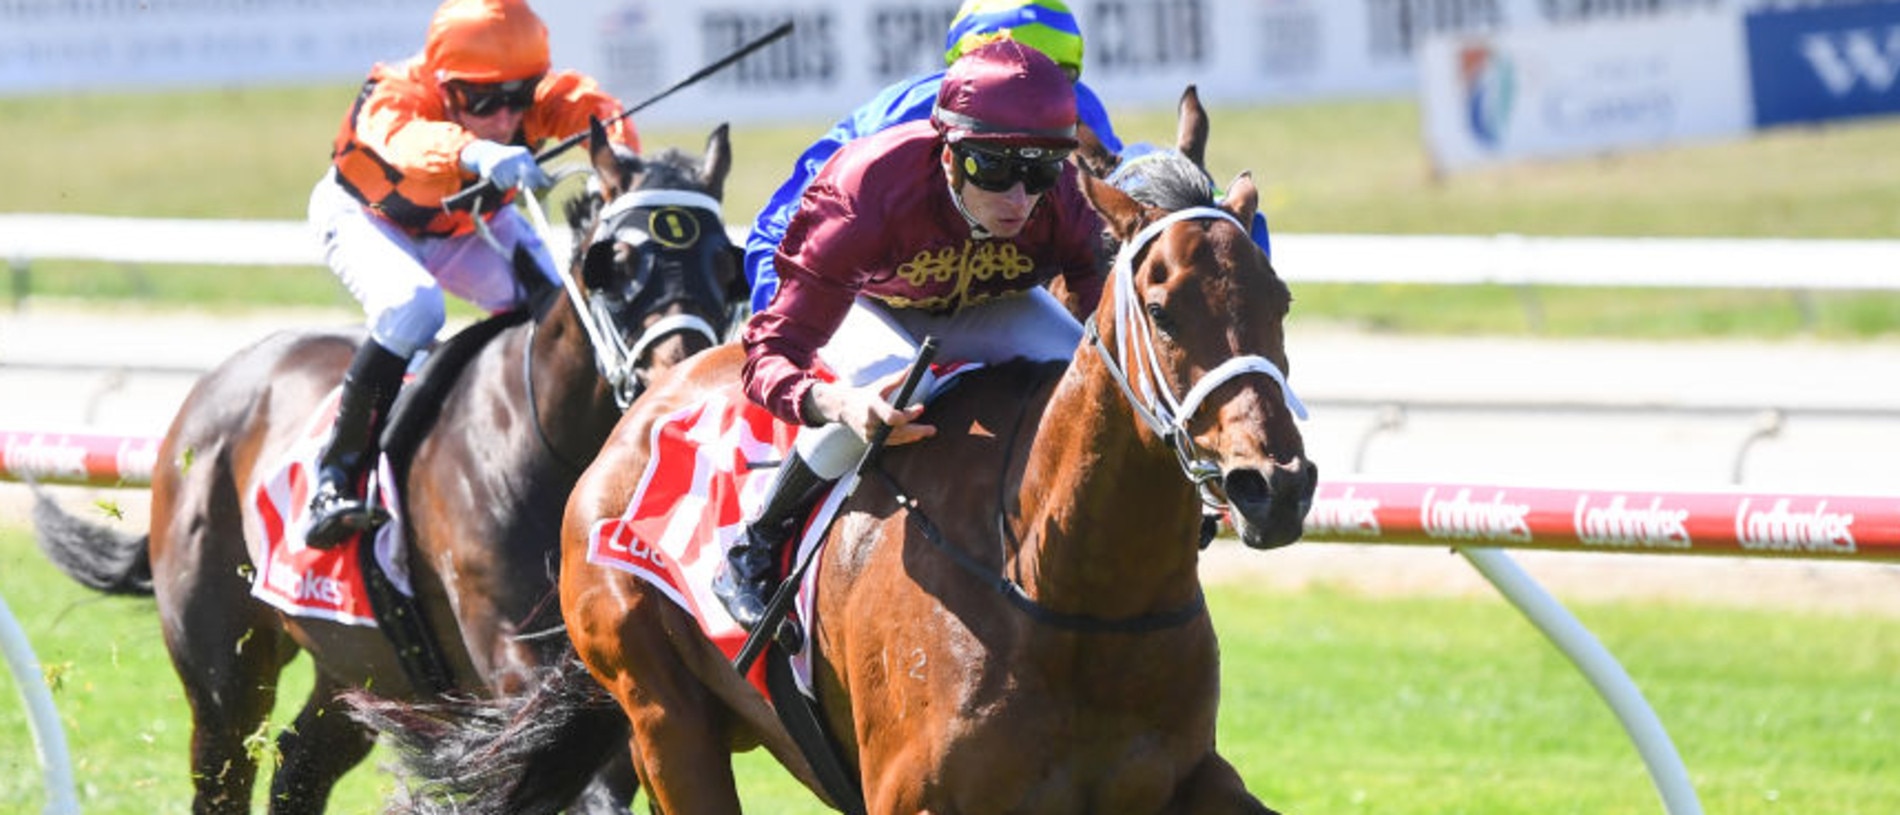 Climbing Star (NZ) ridden by Zac Spain wins the AFC - Peter & Lavella Darose Maiden Plate at Cranbourne Racecourse on September 28, 2022 in Cranbourne, Australia. (Photo by Pat Scala/Racing Photos via Getty Images)